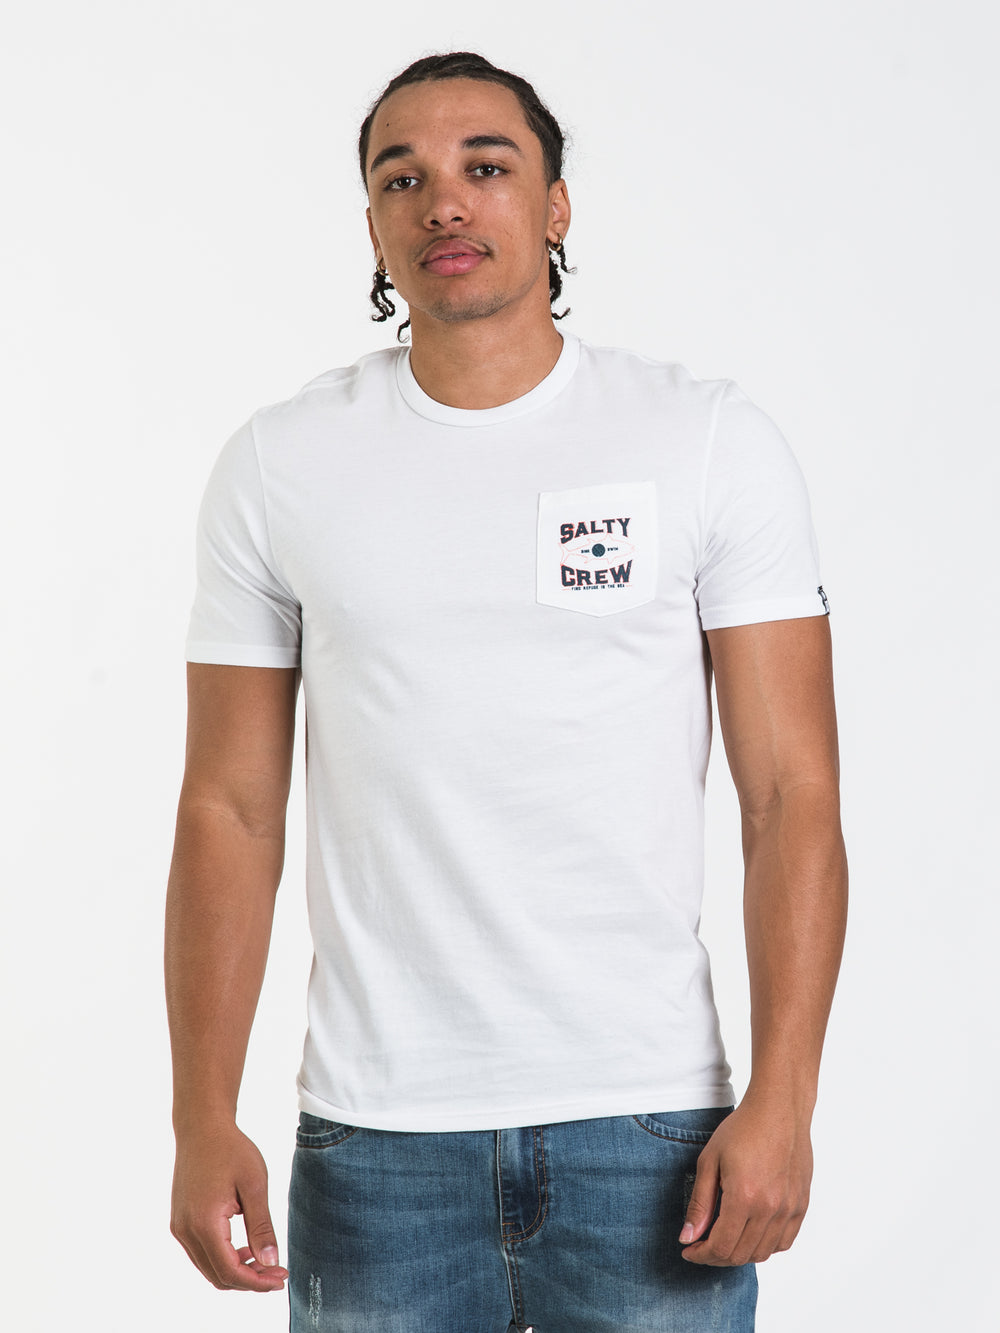 SALTY CREW TIGHT LINES PREMIUM POCKET T-SHIRT - CLEARANCE